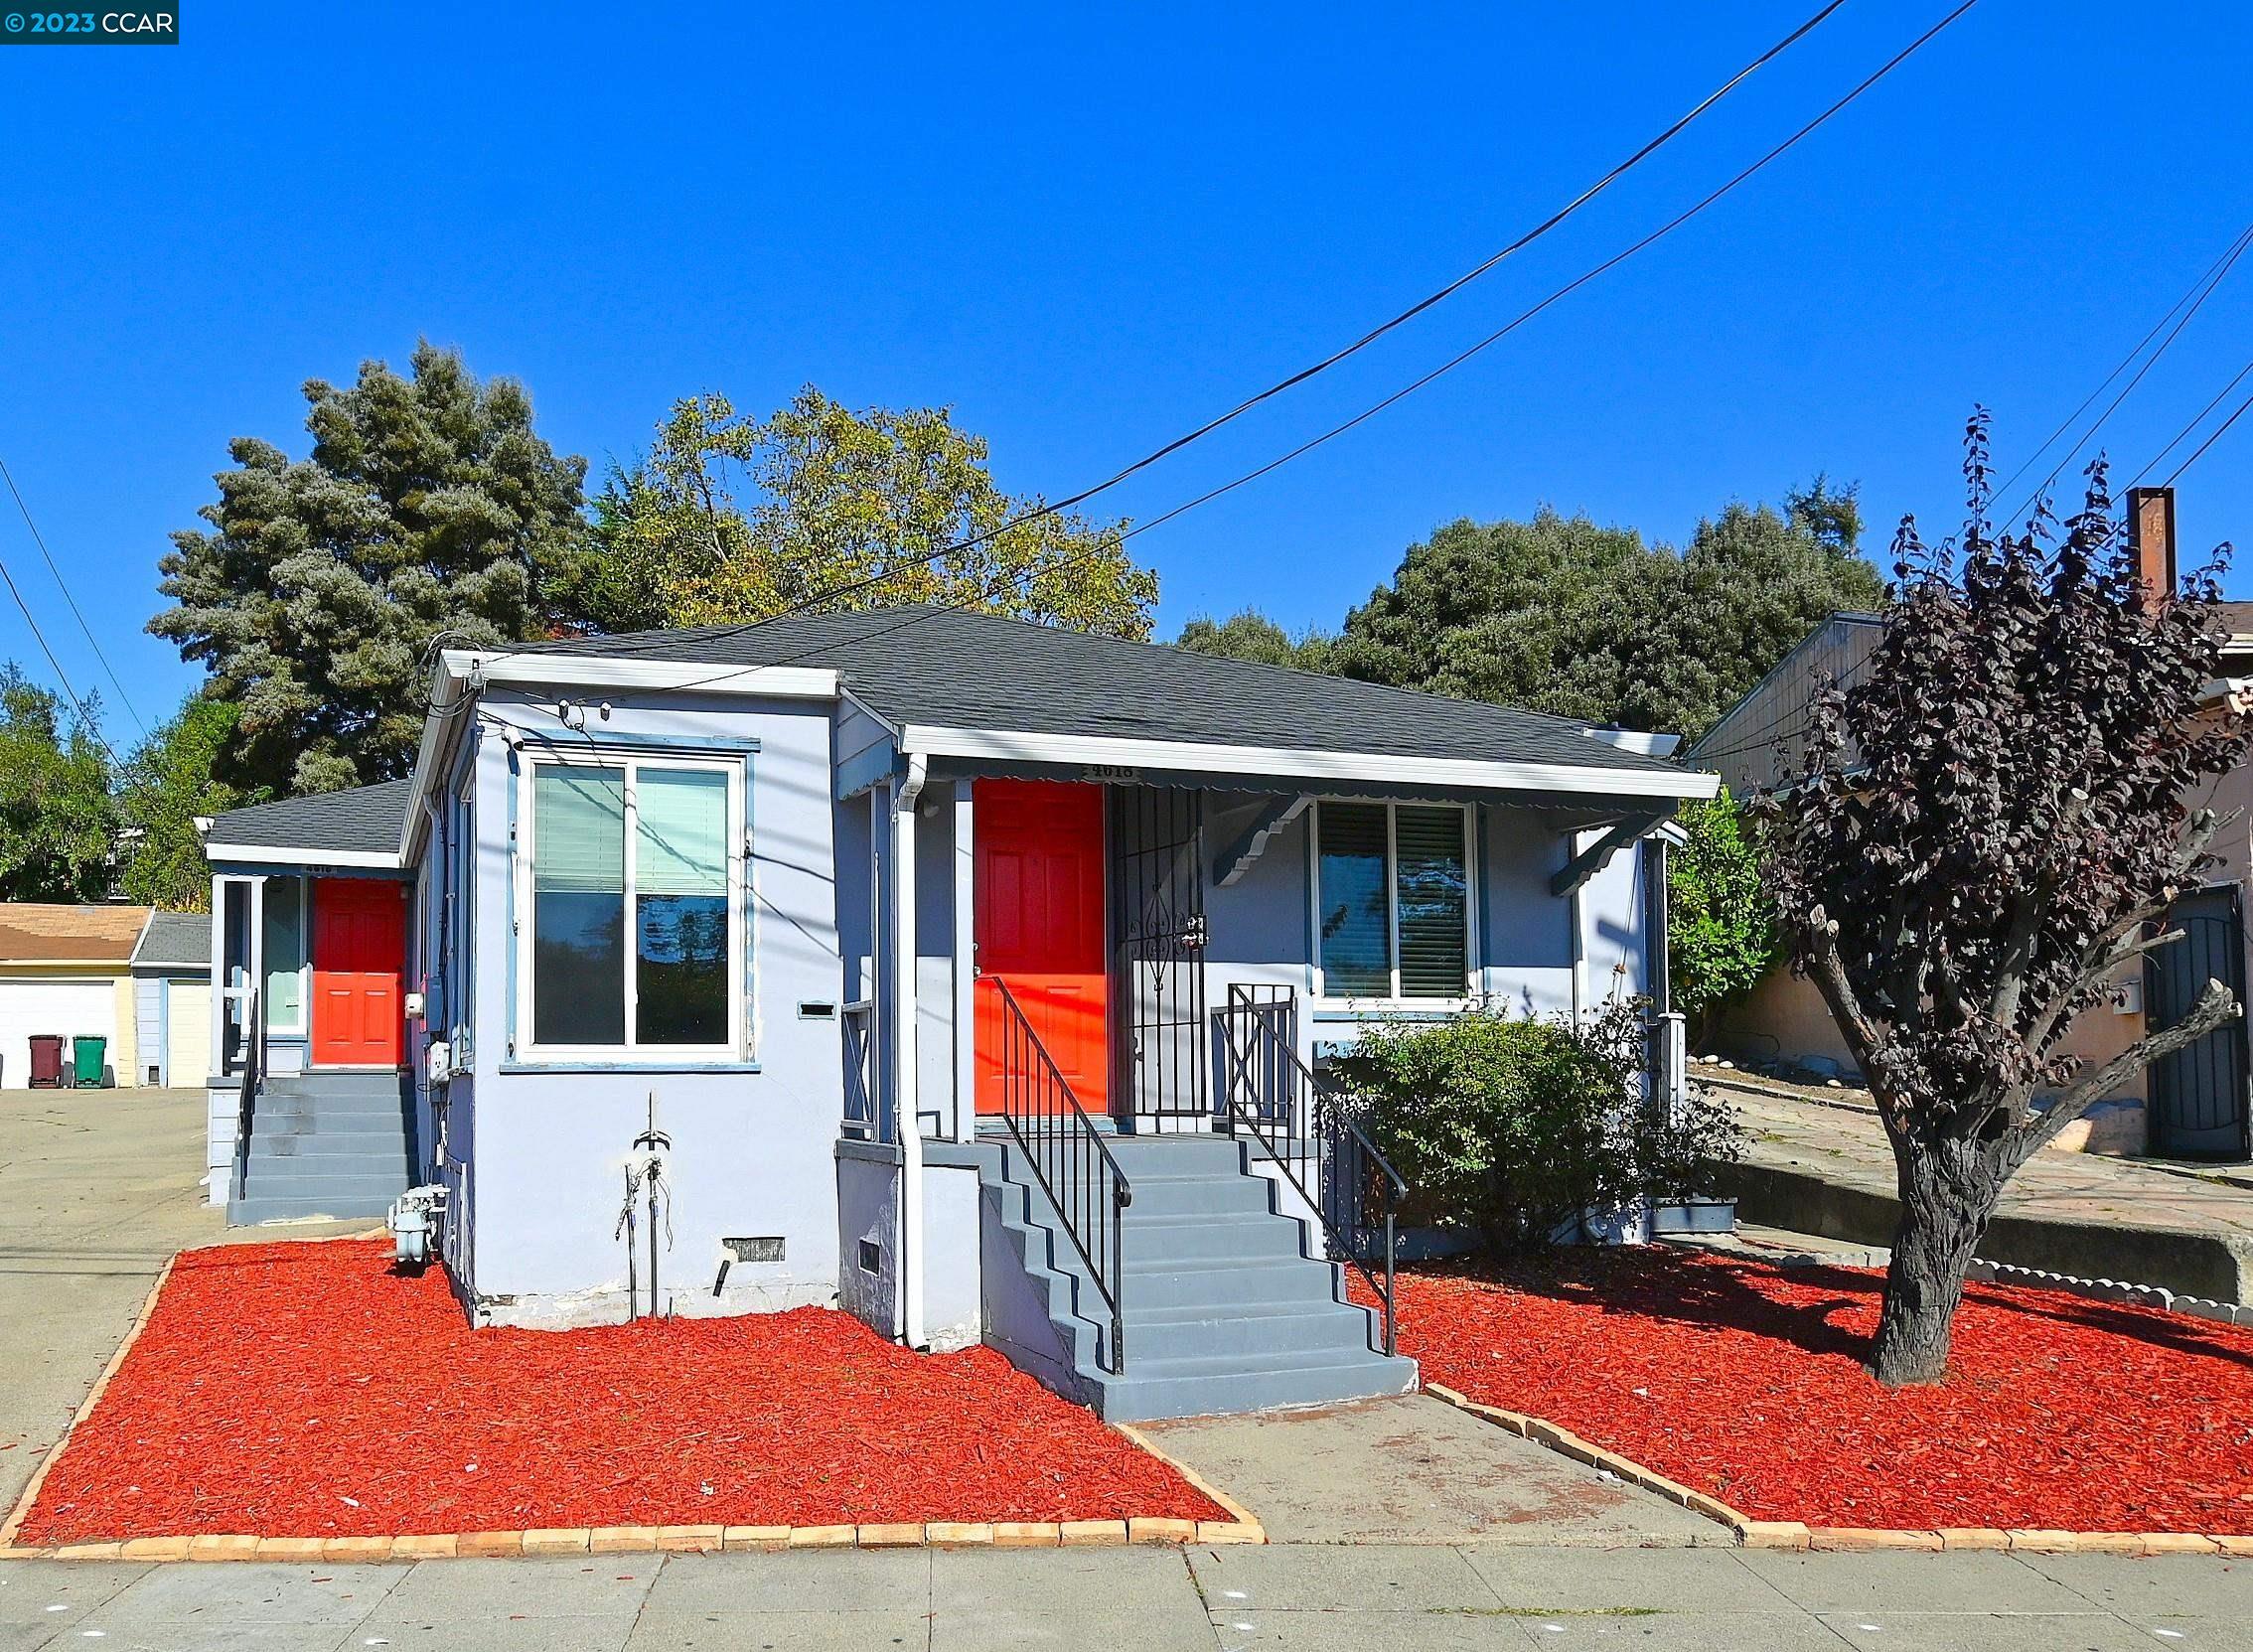 This is a single story duplex centrally located just blocks from The Laurel gate which encompasses many essential services, groceries, pharmacy, cleaners, restaurants, coffee shop and more.  It is also situated minutes from Hwy 13, I-580, Bart and buses.  Each unit is 2br/1ba and 750 sf.  Both units were renovated in 2017, now open concept with laminate wood flooring, shaker cabinets, quartz countertops, deep undermount stainless steel sinks, garbage disposals and gas ranges.  Ceiling fans with lights in the living rooms and ceiling lights in all bedrooms.  The bathrooms were renovated with shaker cabinets, vanity lighting and subway tile over the bathtubs.  The roof and gutters were replaced in 2017.  All the windows are dual pane, washer & dryer hookups in each unit and separate PG&E and water meters.   A spacious detached 2-car garage and an open backyard.  Live in one unit and rent the other, the previous renter paid $2400 per month.